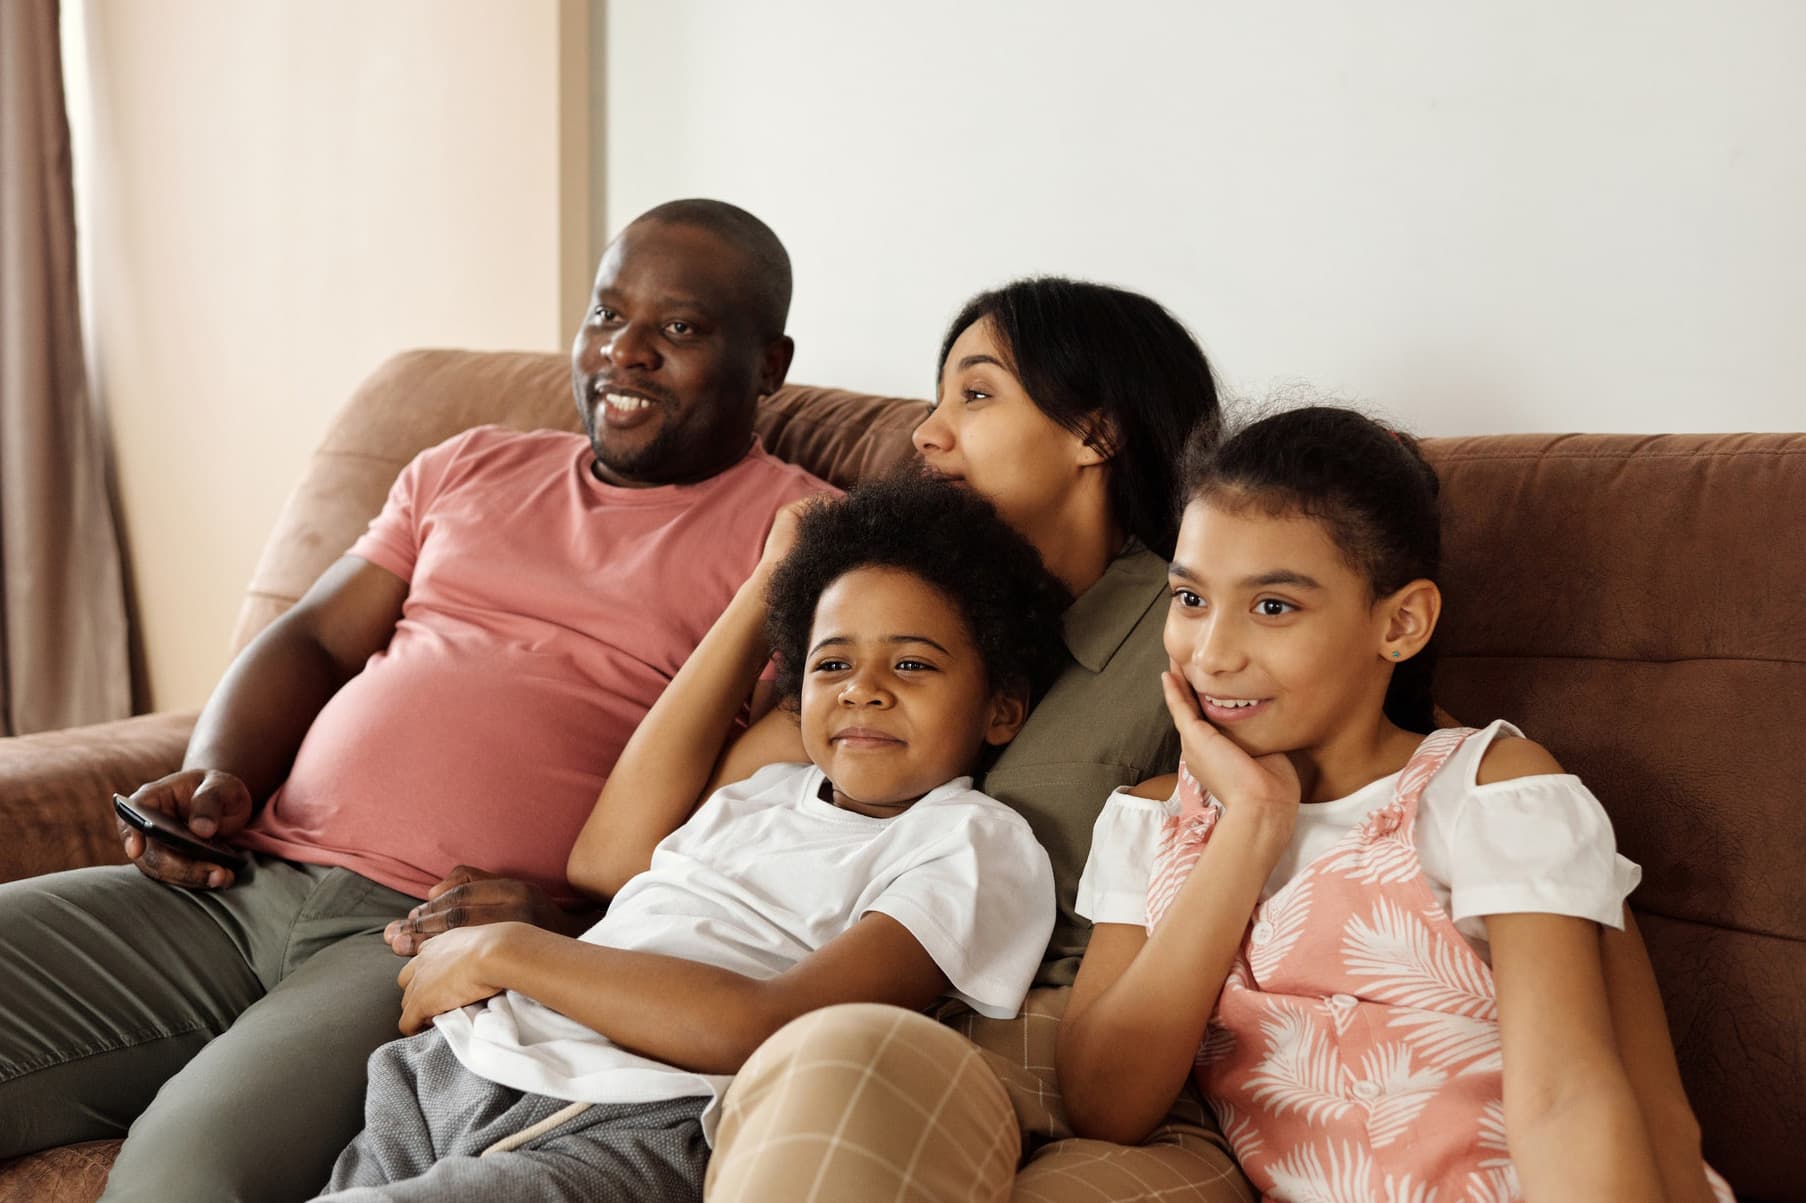 Family lounging on a brown couch together watching tv while the dad holds the remote